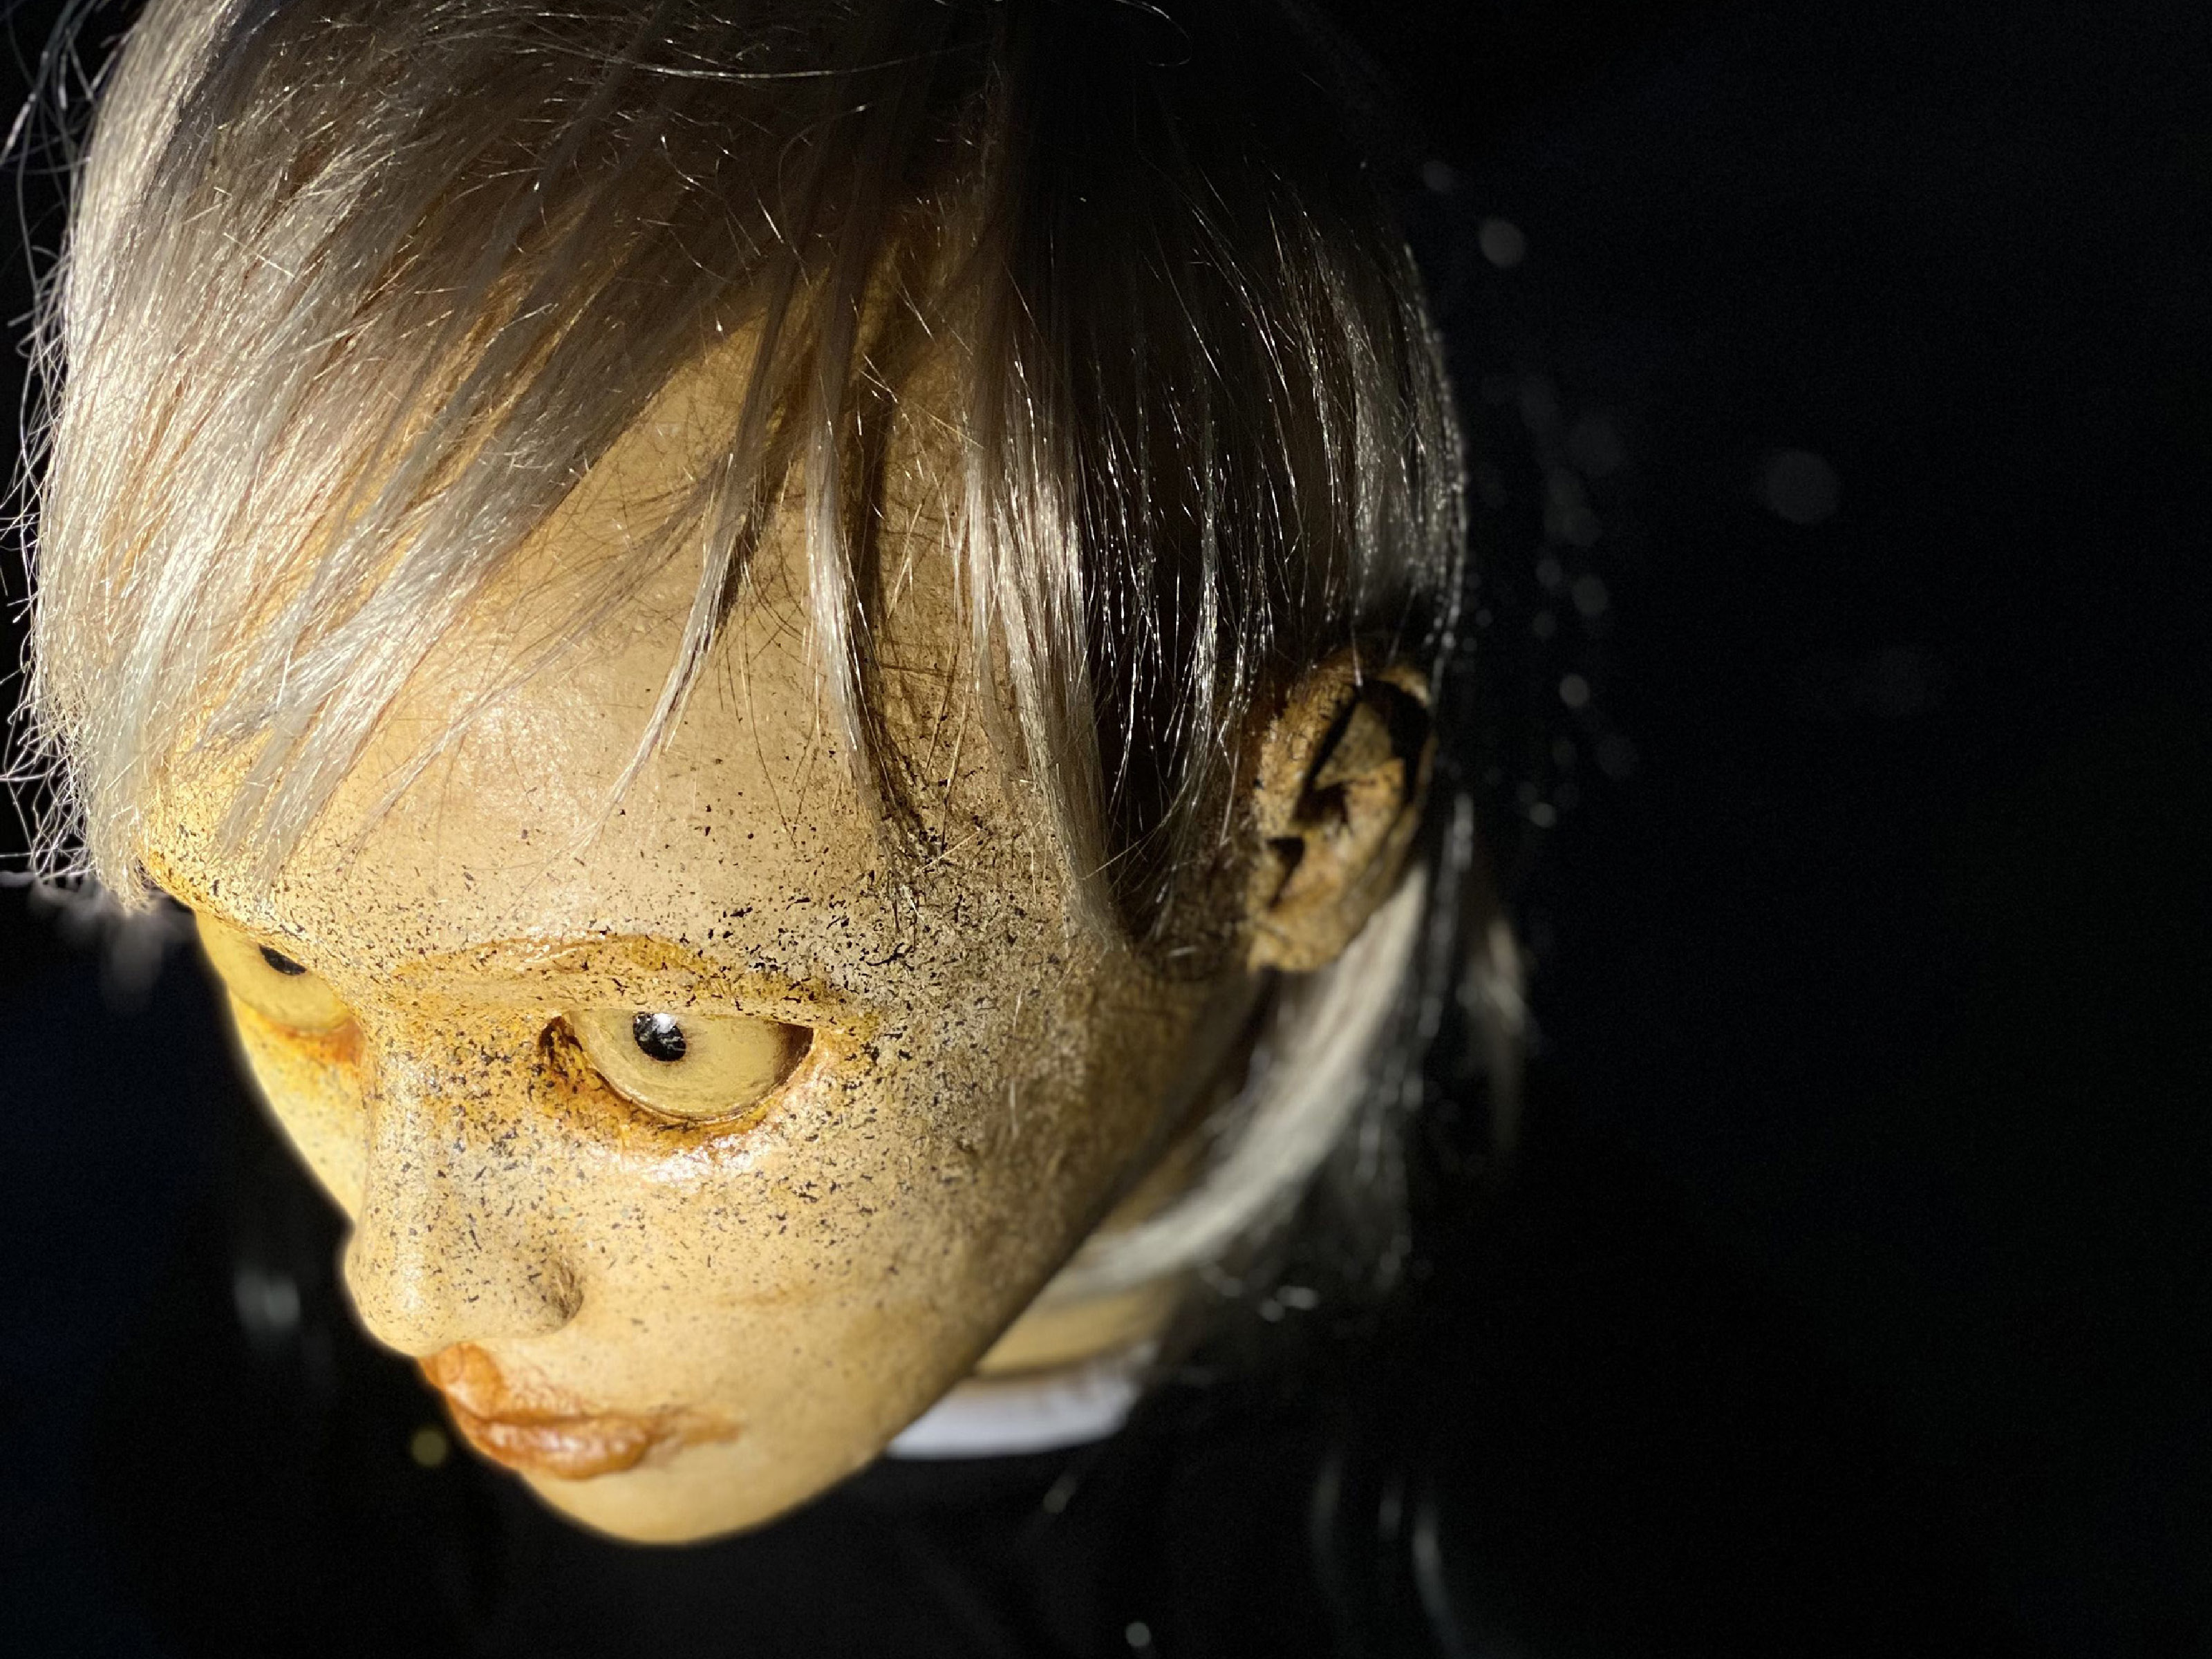 A doll with white hair and big yellow eyes looks rigidly to the left. The camera position is above the doll. Only the doll's head is visible, the background is dark.